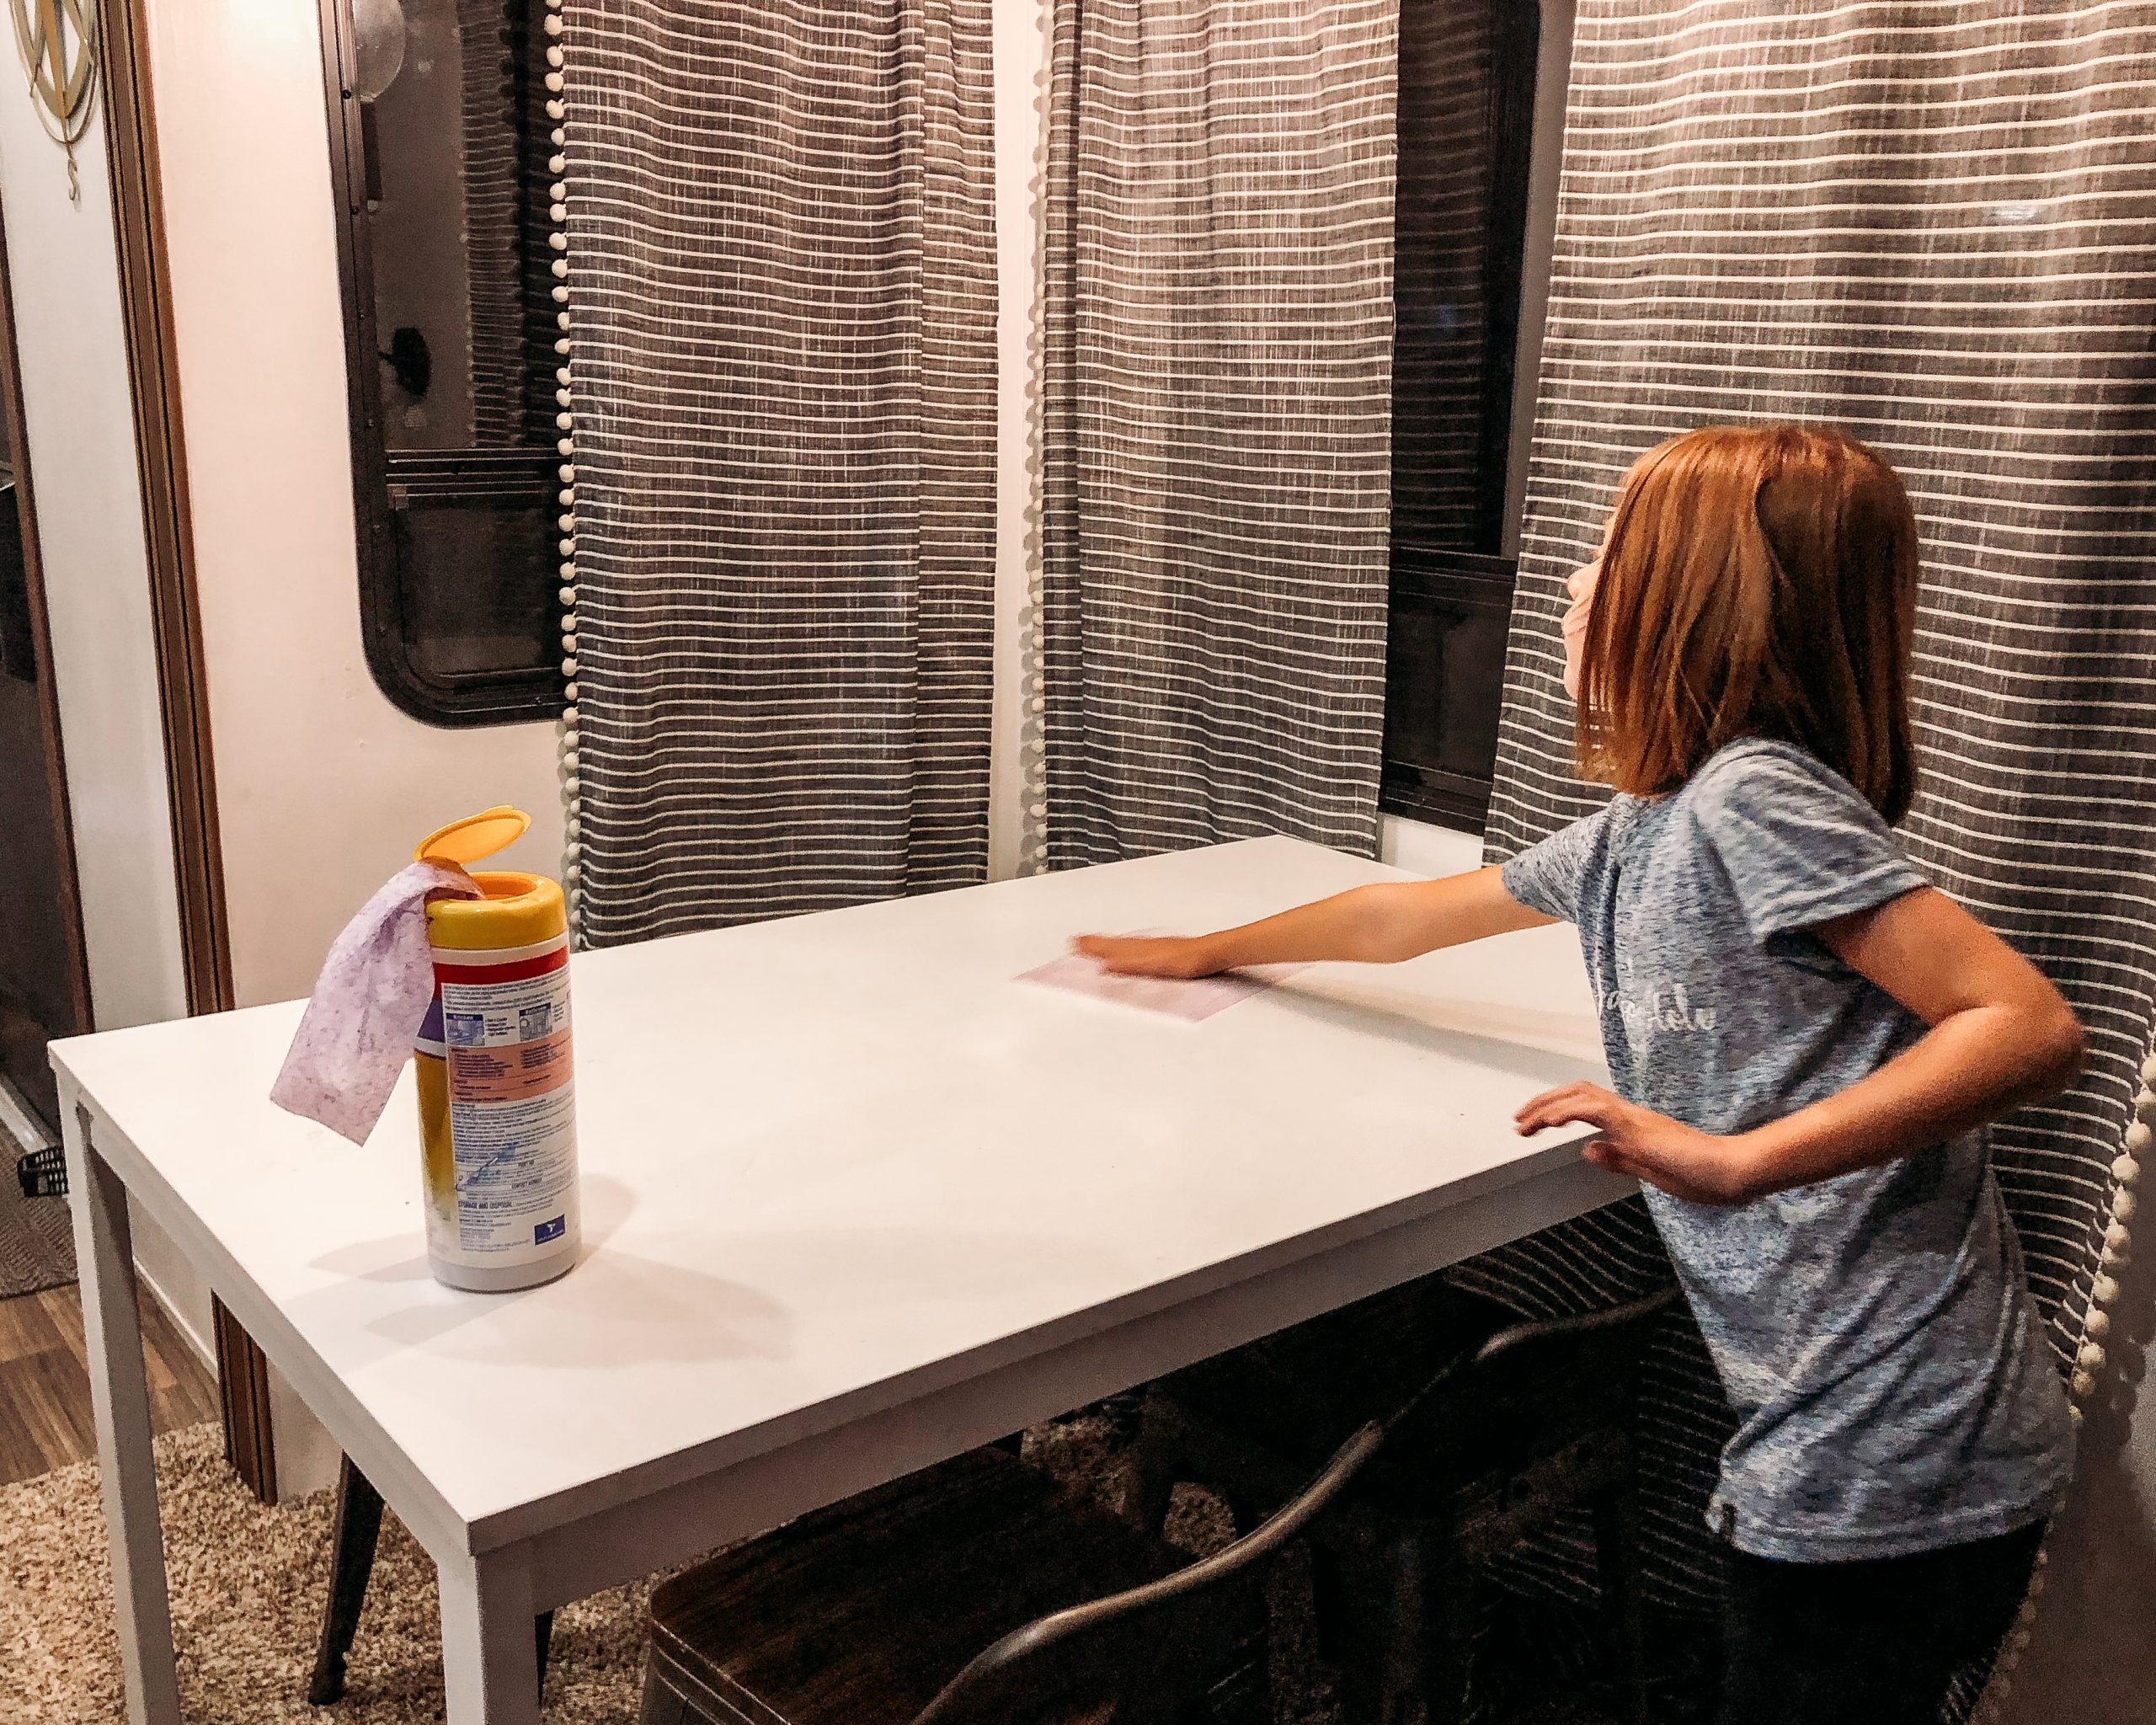 Kid cleaning a table in an RV